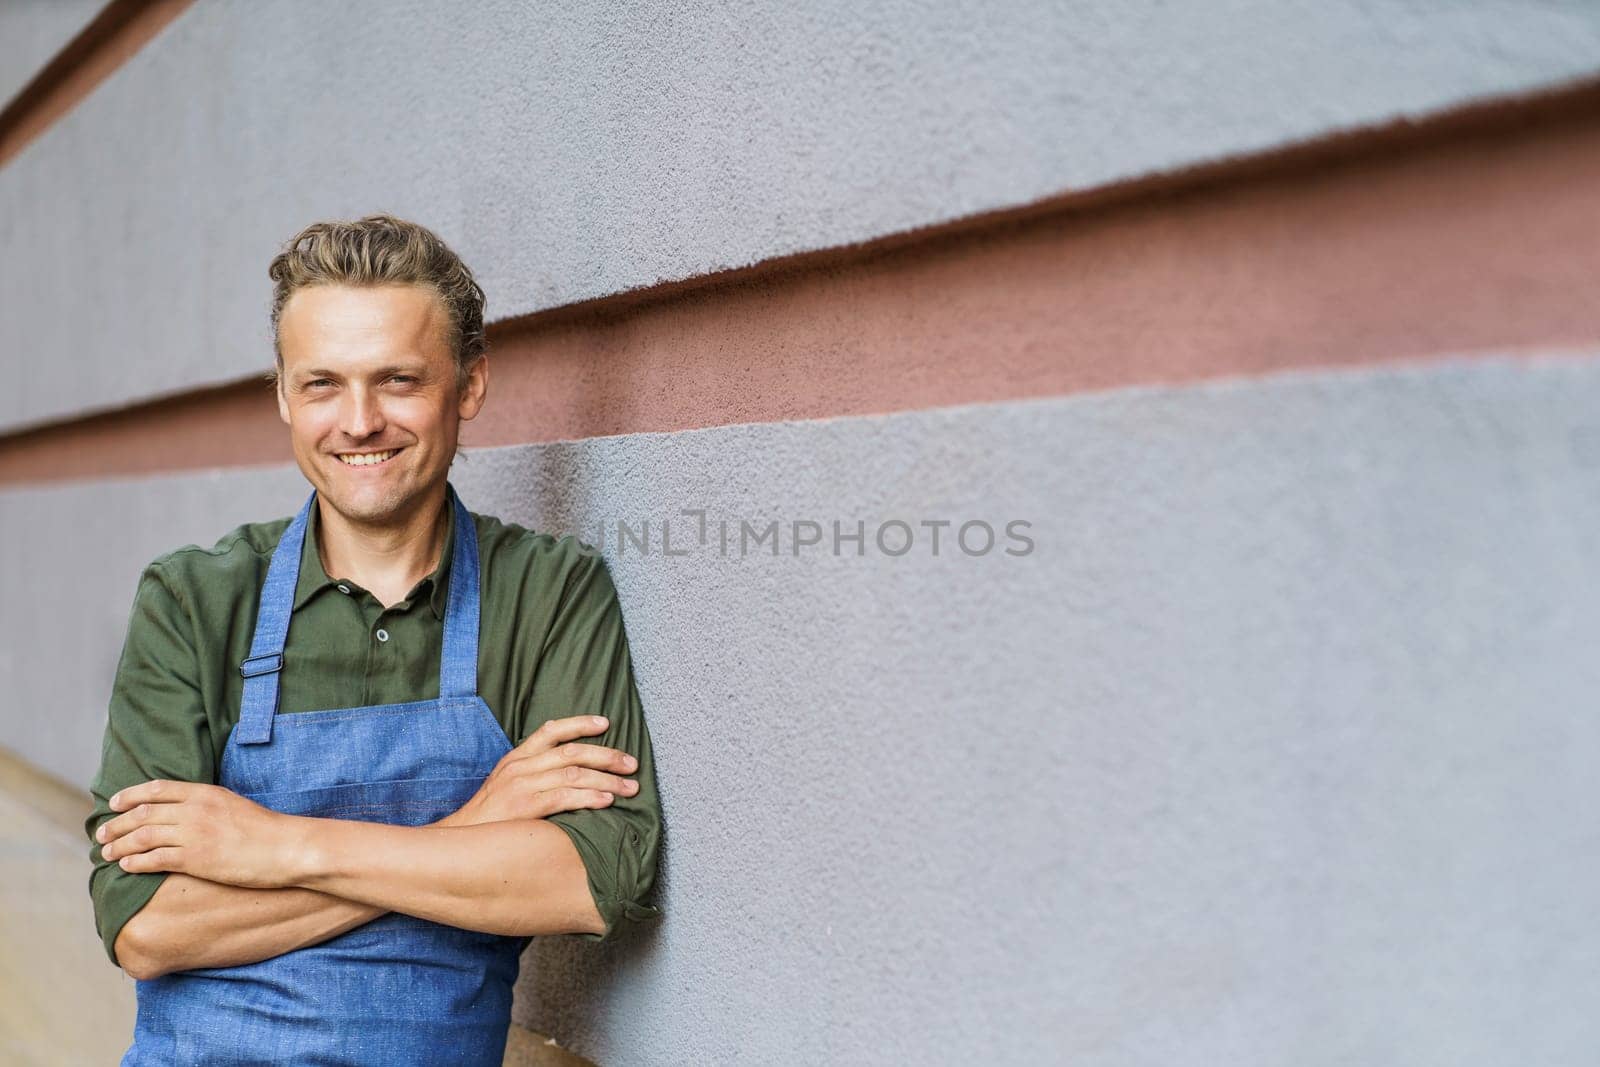 Mid-aged waiter in apron, smiling while standing near wall with crossed hands. With friendly and welcoming smile, waiter embodies essence of customer service in hospitality industry. . High quality photo